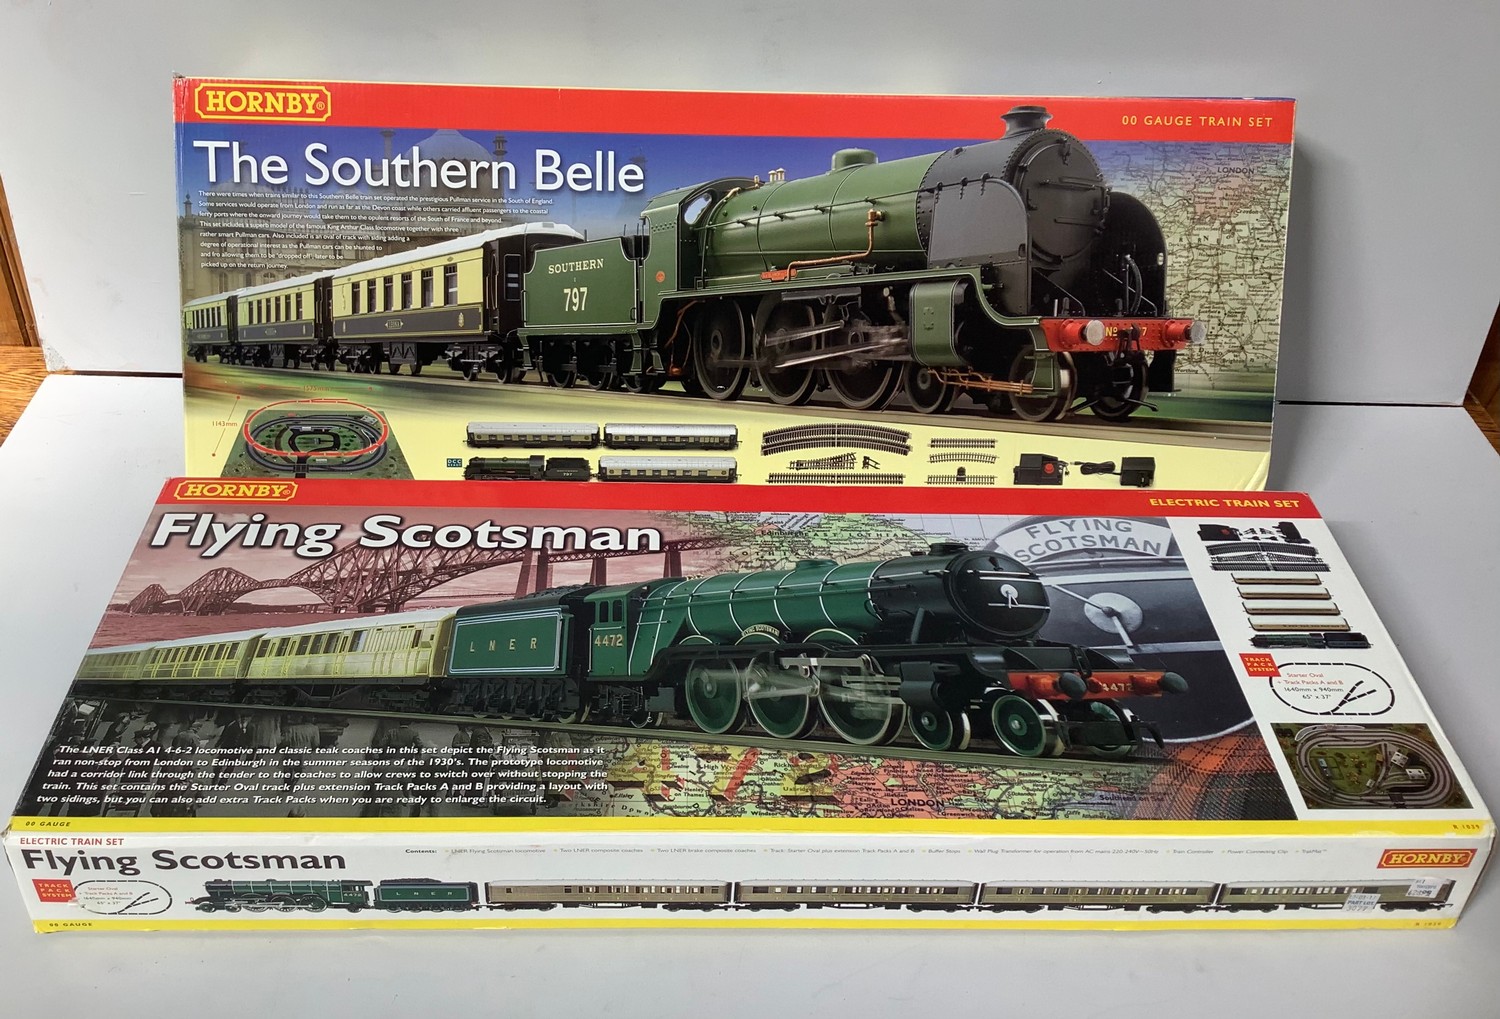 Hornby 00 gauge train set The Southern Belle R1118 together with the Flying Scotsman R1039 00